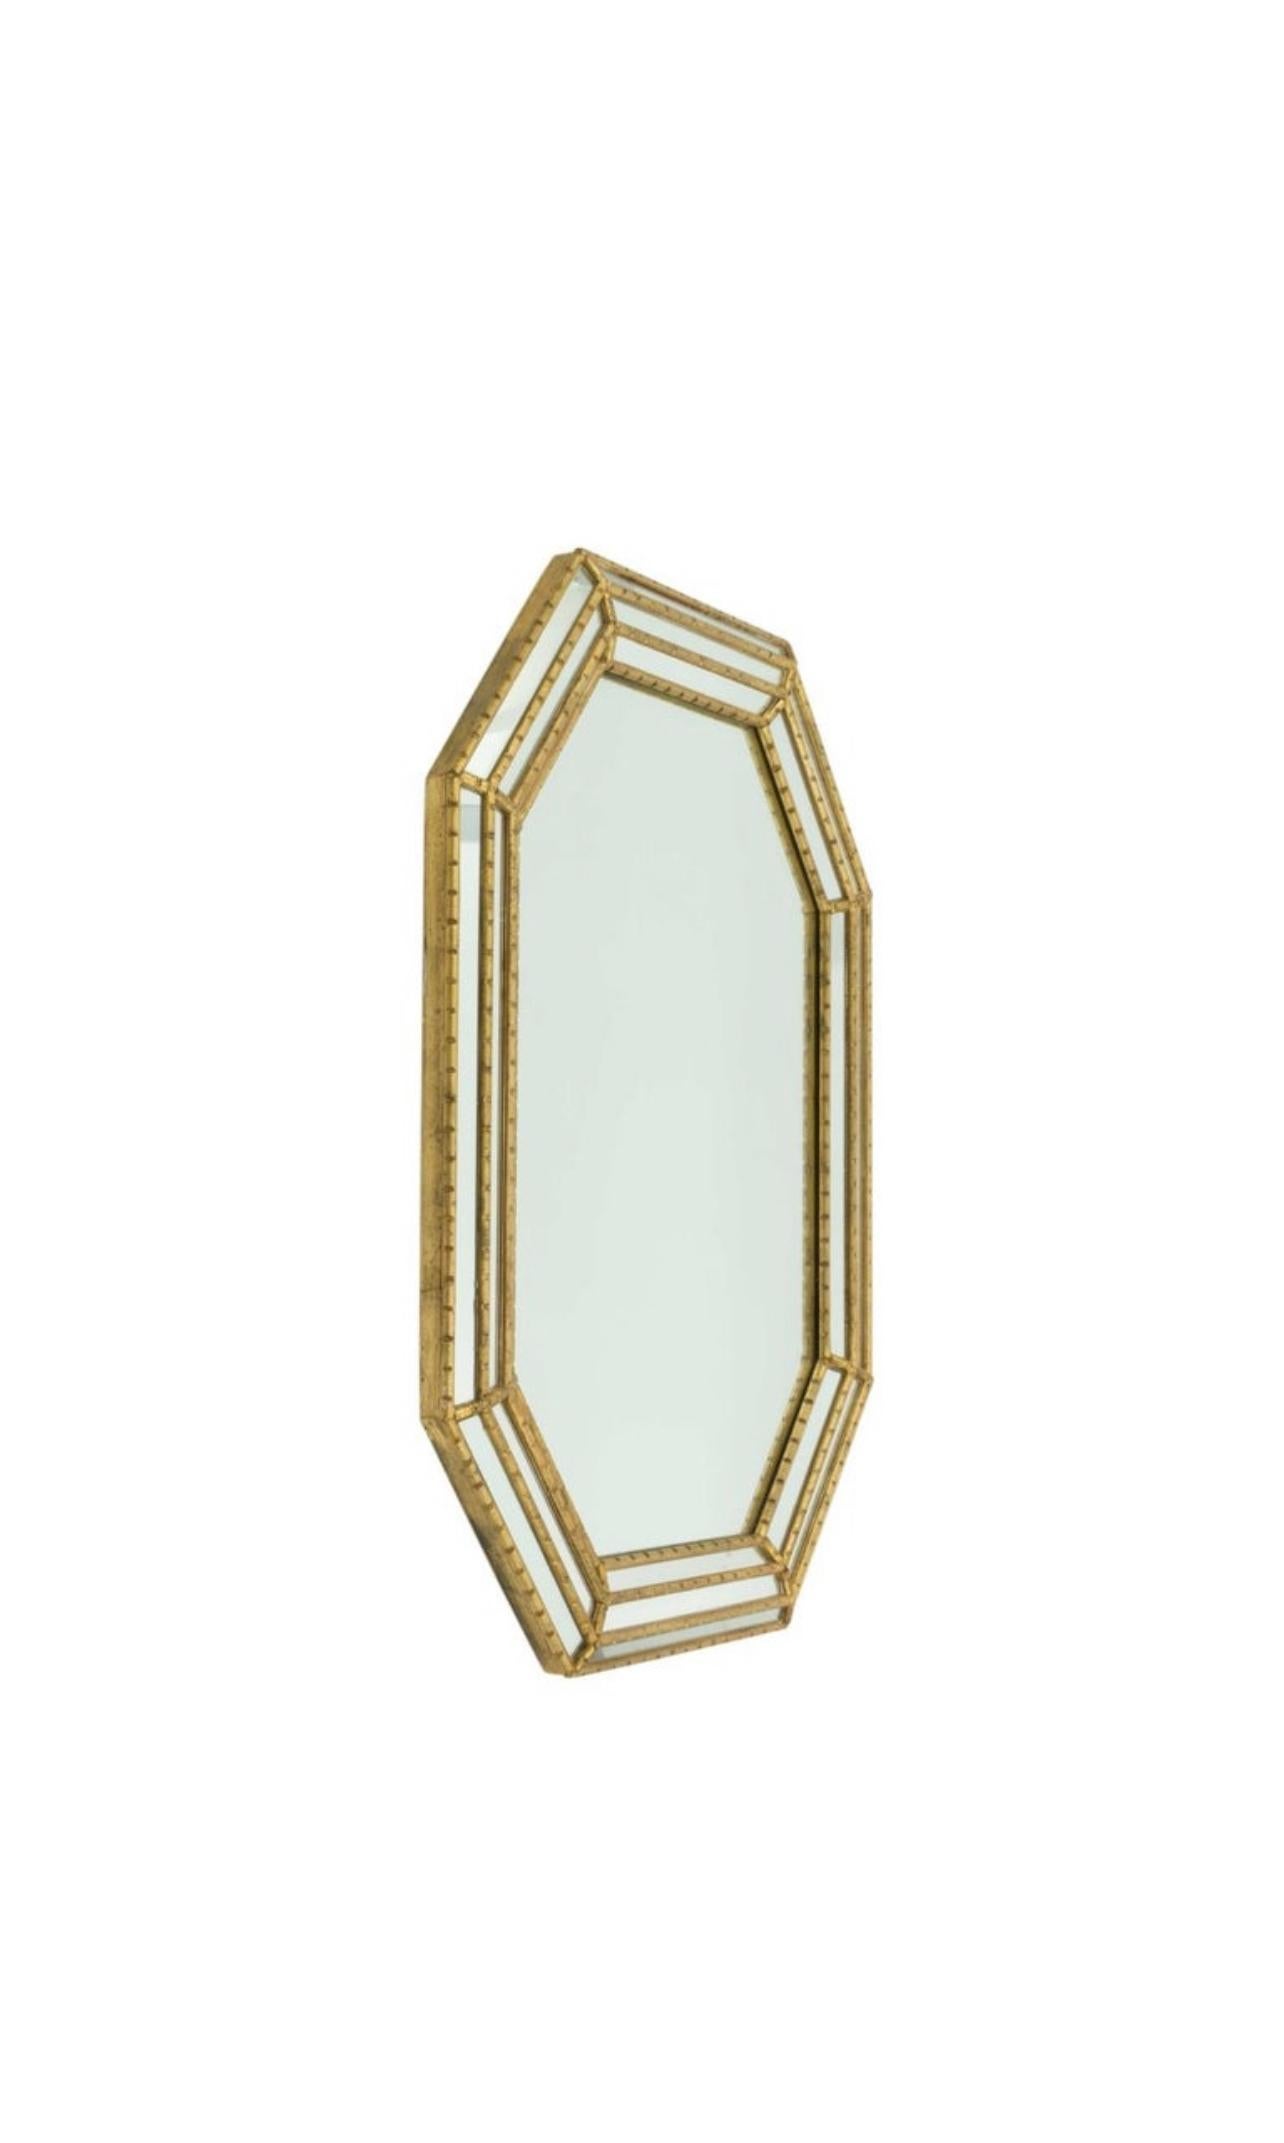 Hollywood Regency Labarge Gold Faux Bamboo Mirror